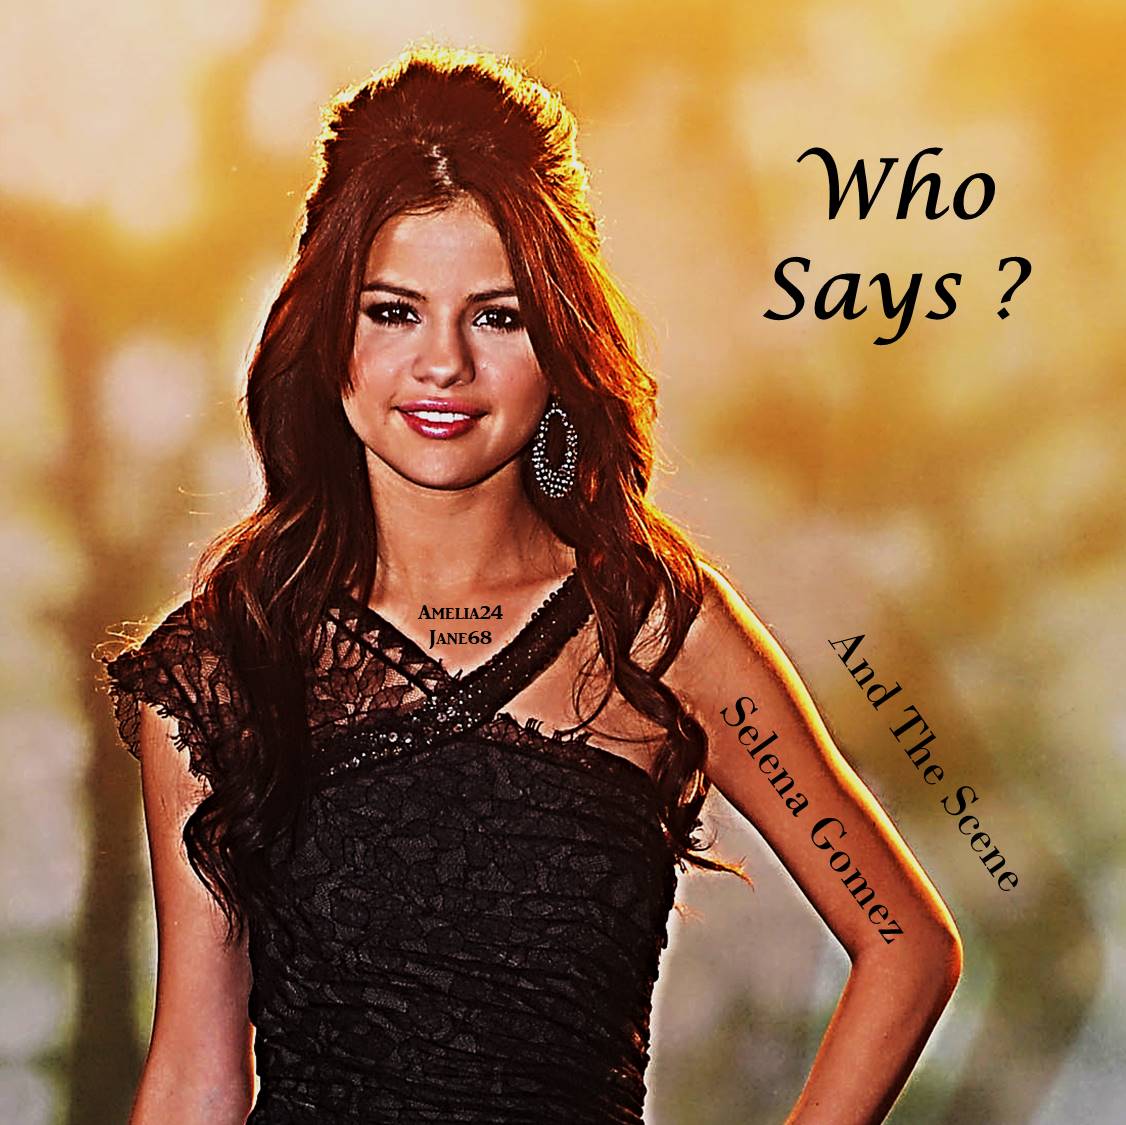 Who Says BY Selena Gomez And The Scene